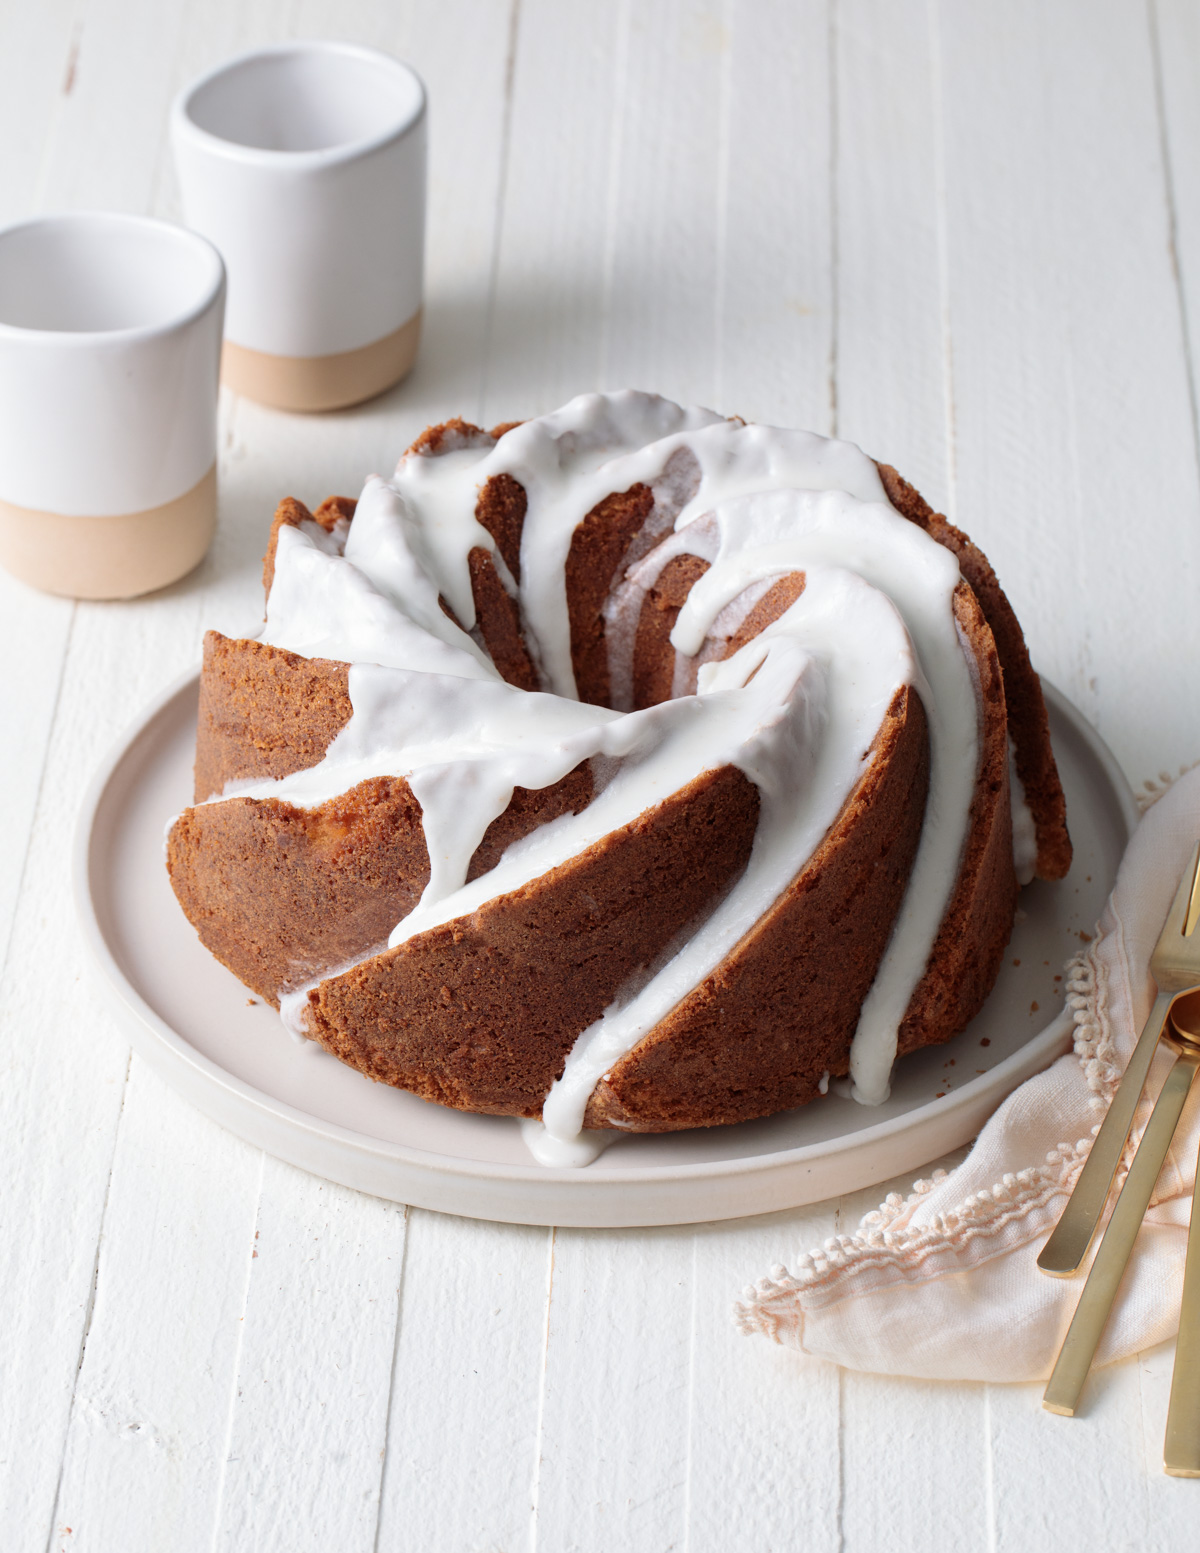 A simple bundt cake with vanilla glaze on top set on a white wood table